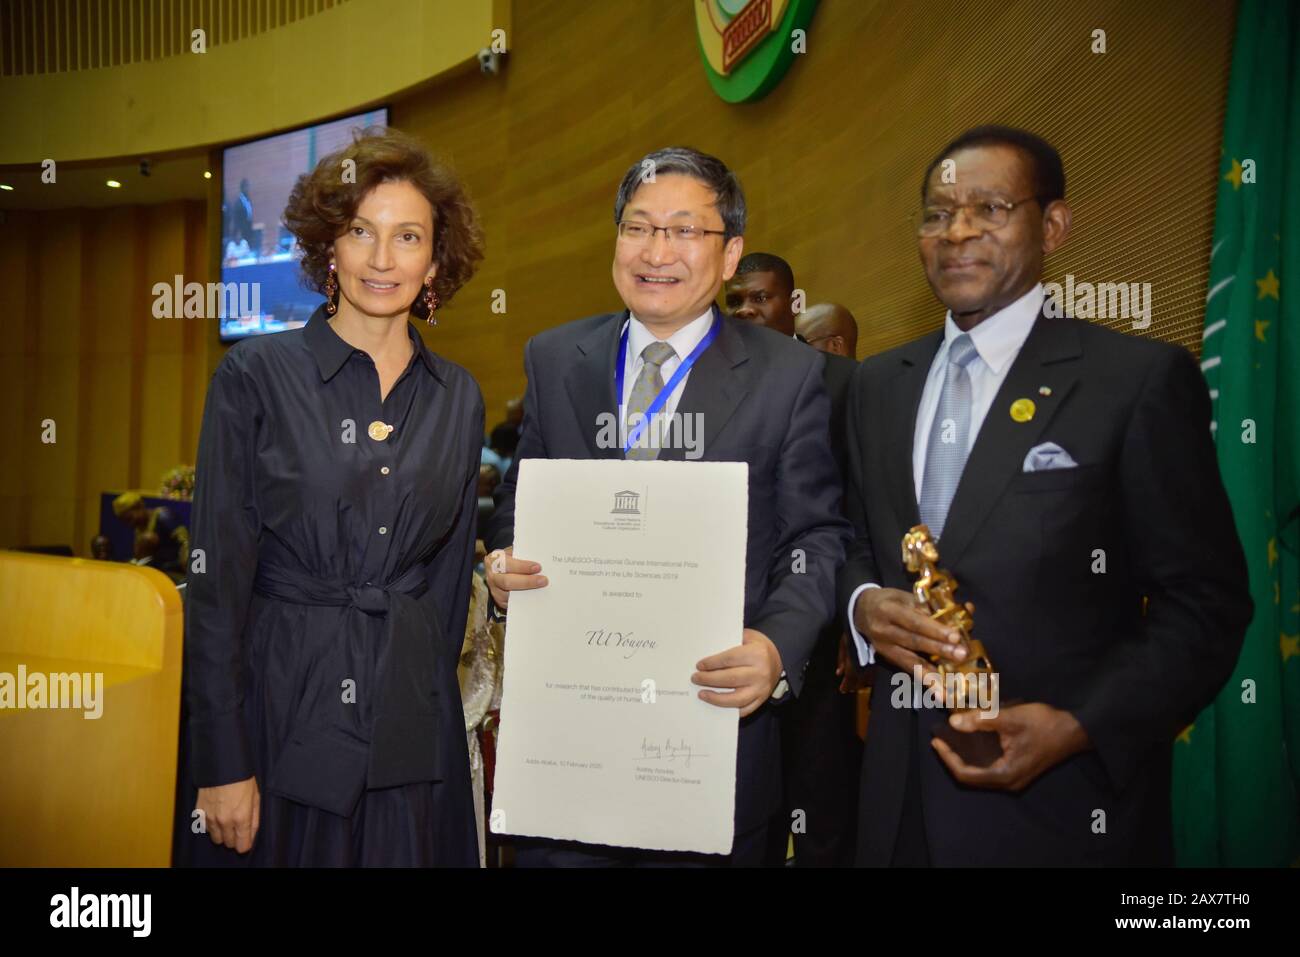 (200211) -- ADDIS ABABA, Feb. 11, 2020 (Xinhua) -- Liu Yuxi (C), head of the Chinese Mission to the AU, poses for photo with President of Equatorial Guinea Teodoro Obiang Nguema Mbasogo (R) and the Director-General of UNESCO Audrey Azoulay, after receiving the UNESCO-Equatorial Guinea International Prize for Research in the Life Sciences on behalf of Tu Youyou, in Addis Ababa, Ethiopia, Feb. 10, 2020. Chinese Nobel laureate Tu Youyou has been awarded the UNESCO-Equatorial Guinea International Prize for Research in the Life Sciences for her research into parasitic diseases. (Photo by Michael T Stock Photo